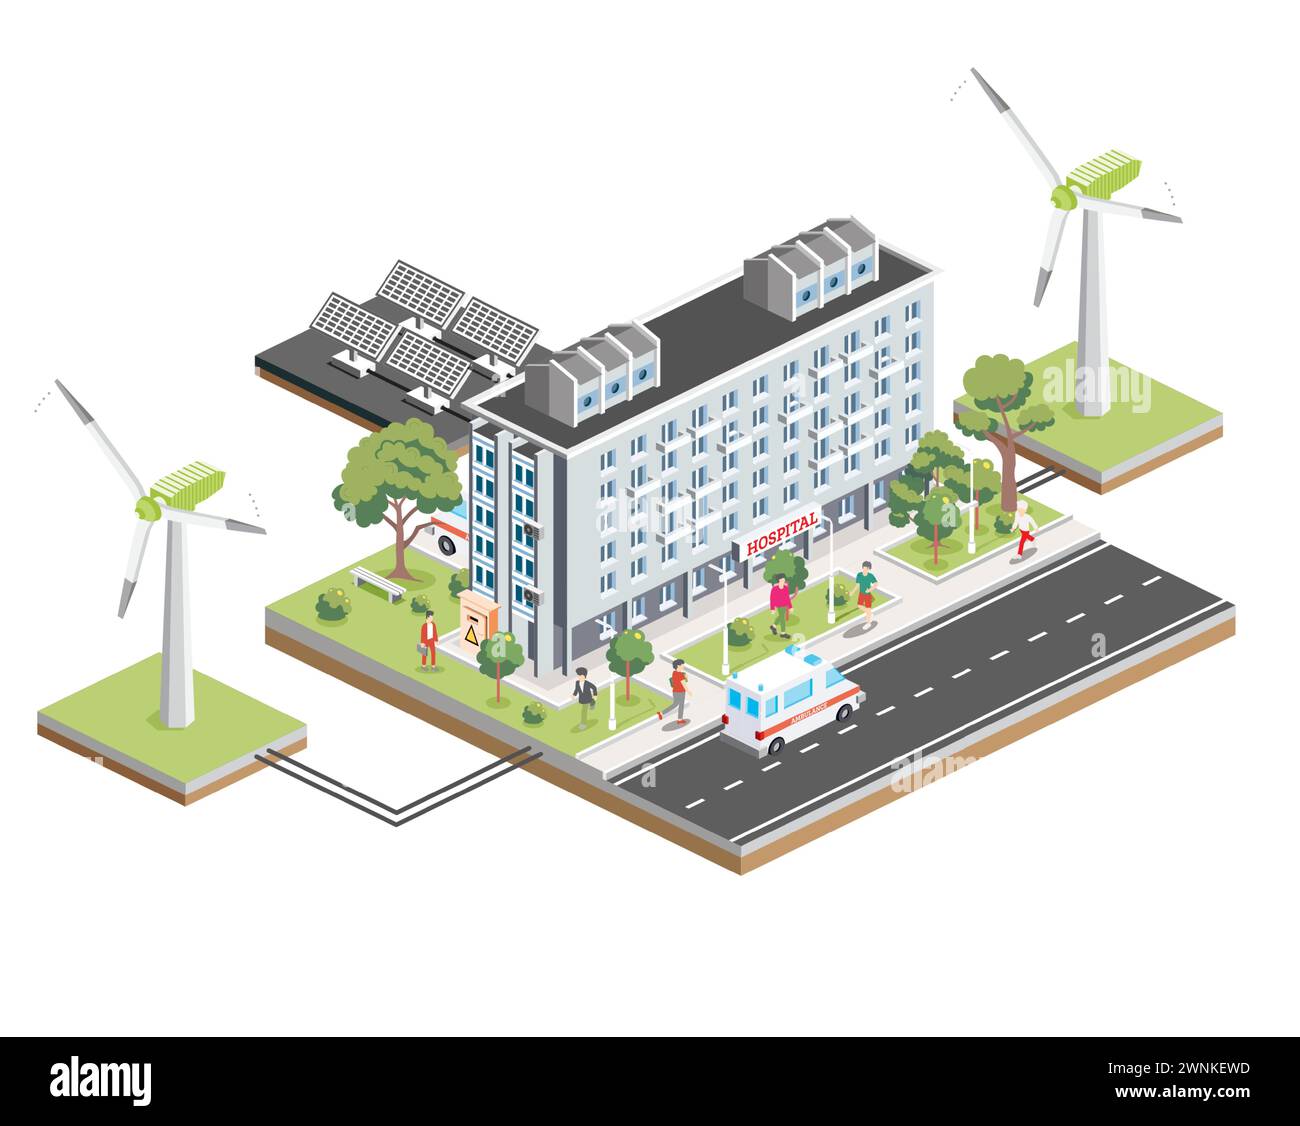 Isometric building of hospital with solar panels and wind turbines. Vector illustration. City clinic. Architectural symbol isolated on white. Stock Vector